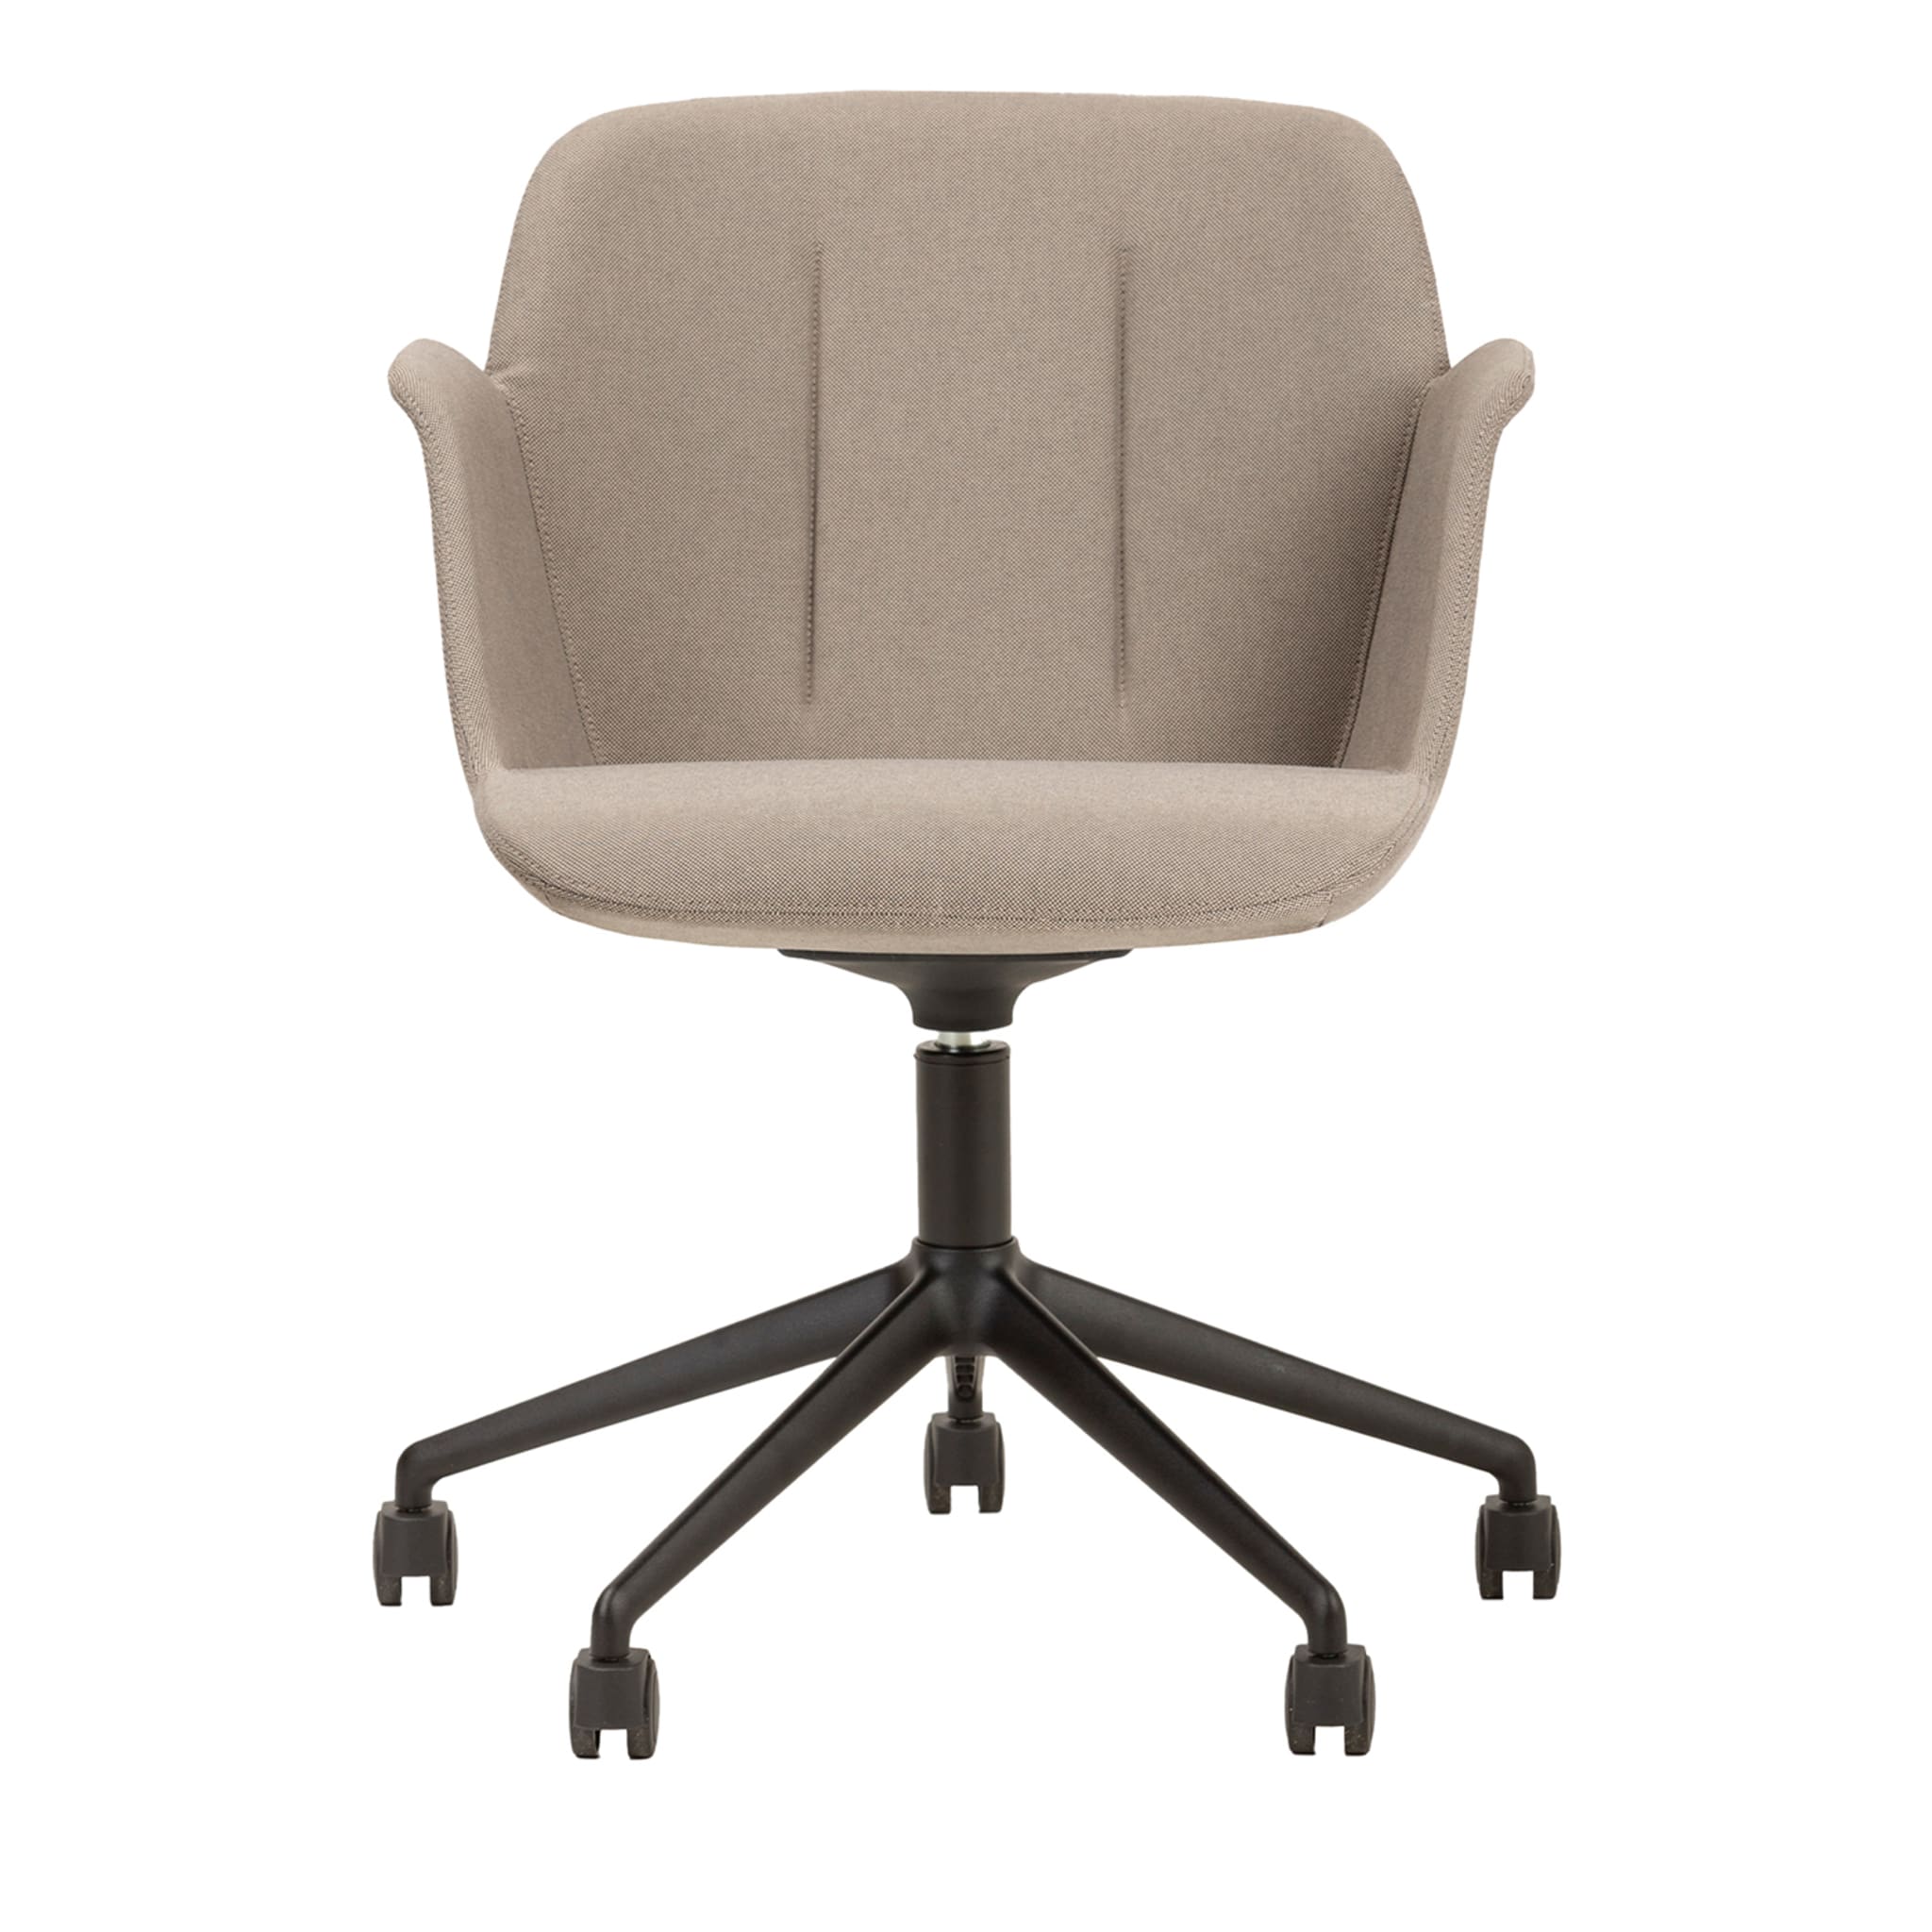 Hive Beige Desk Chair by FIDIVI - Main view